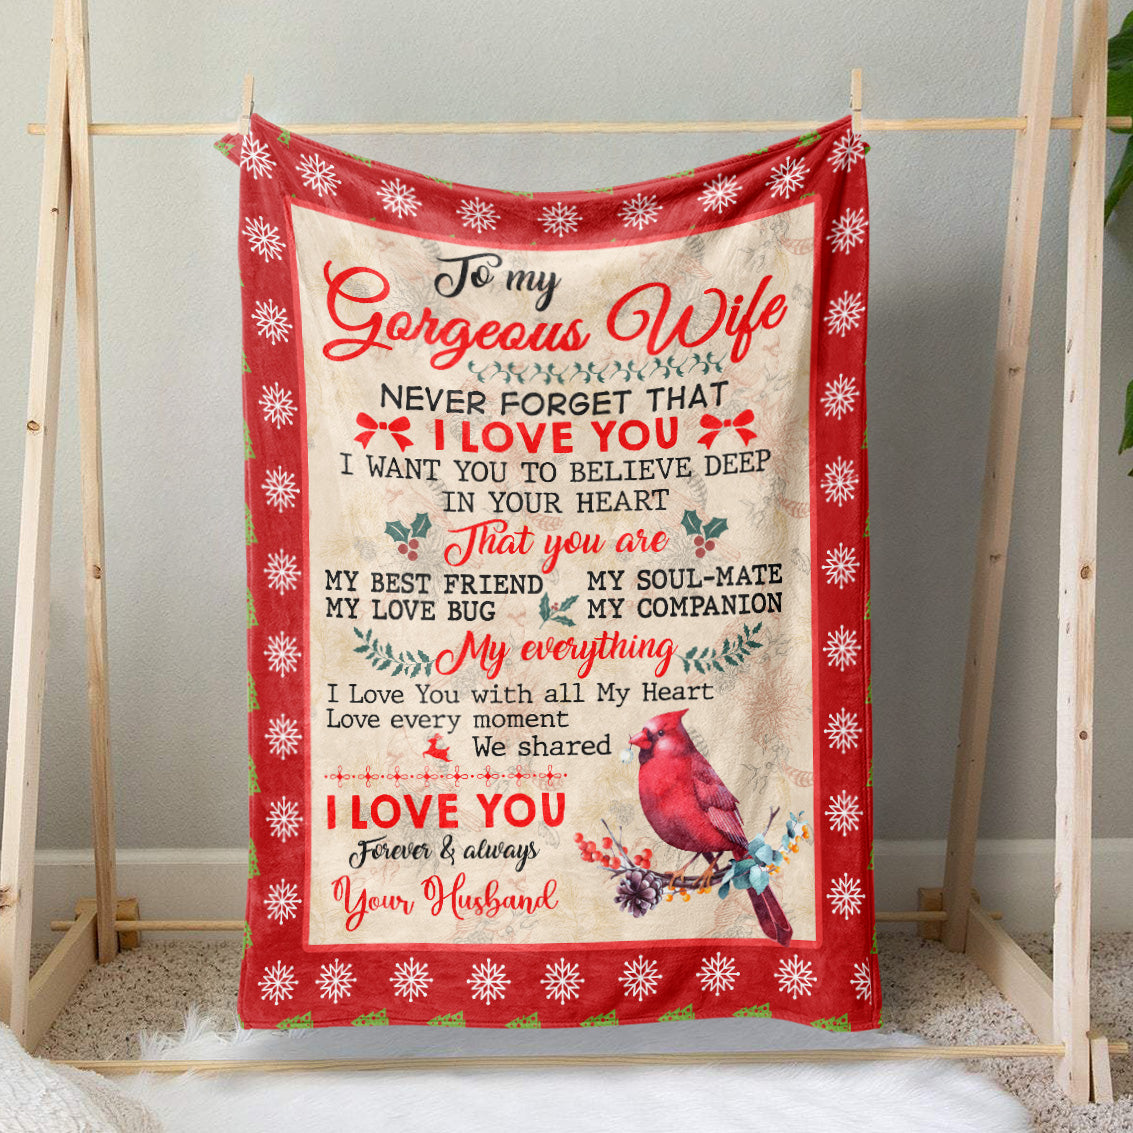 Christmas Gift Ideas Blanket for Wife, To My Gorgeous Wife, You Are My Best Friend, Soulmate, Love Bug and Companion Blanket, Christmas Gift for Her